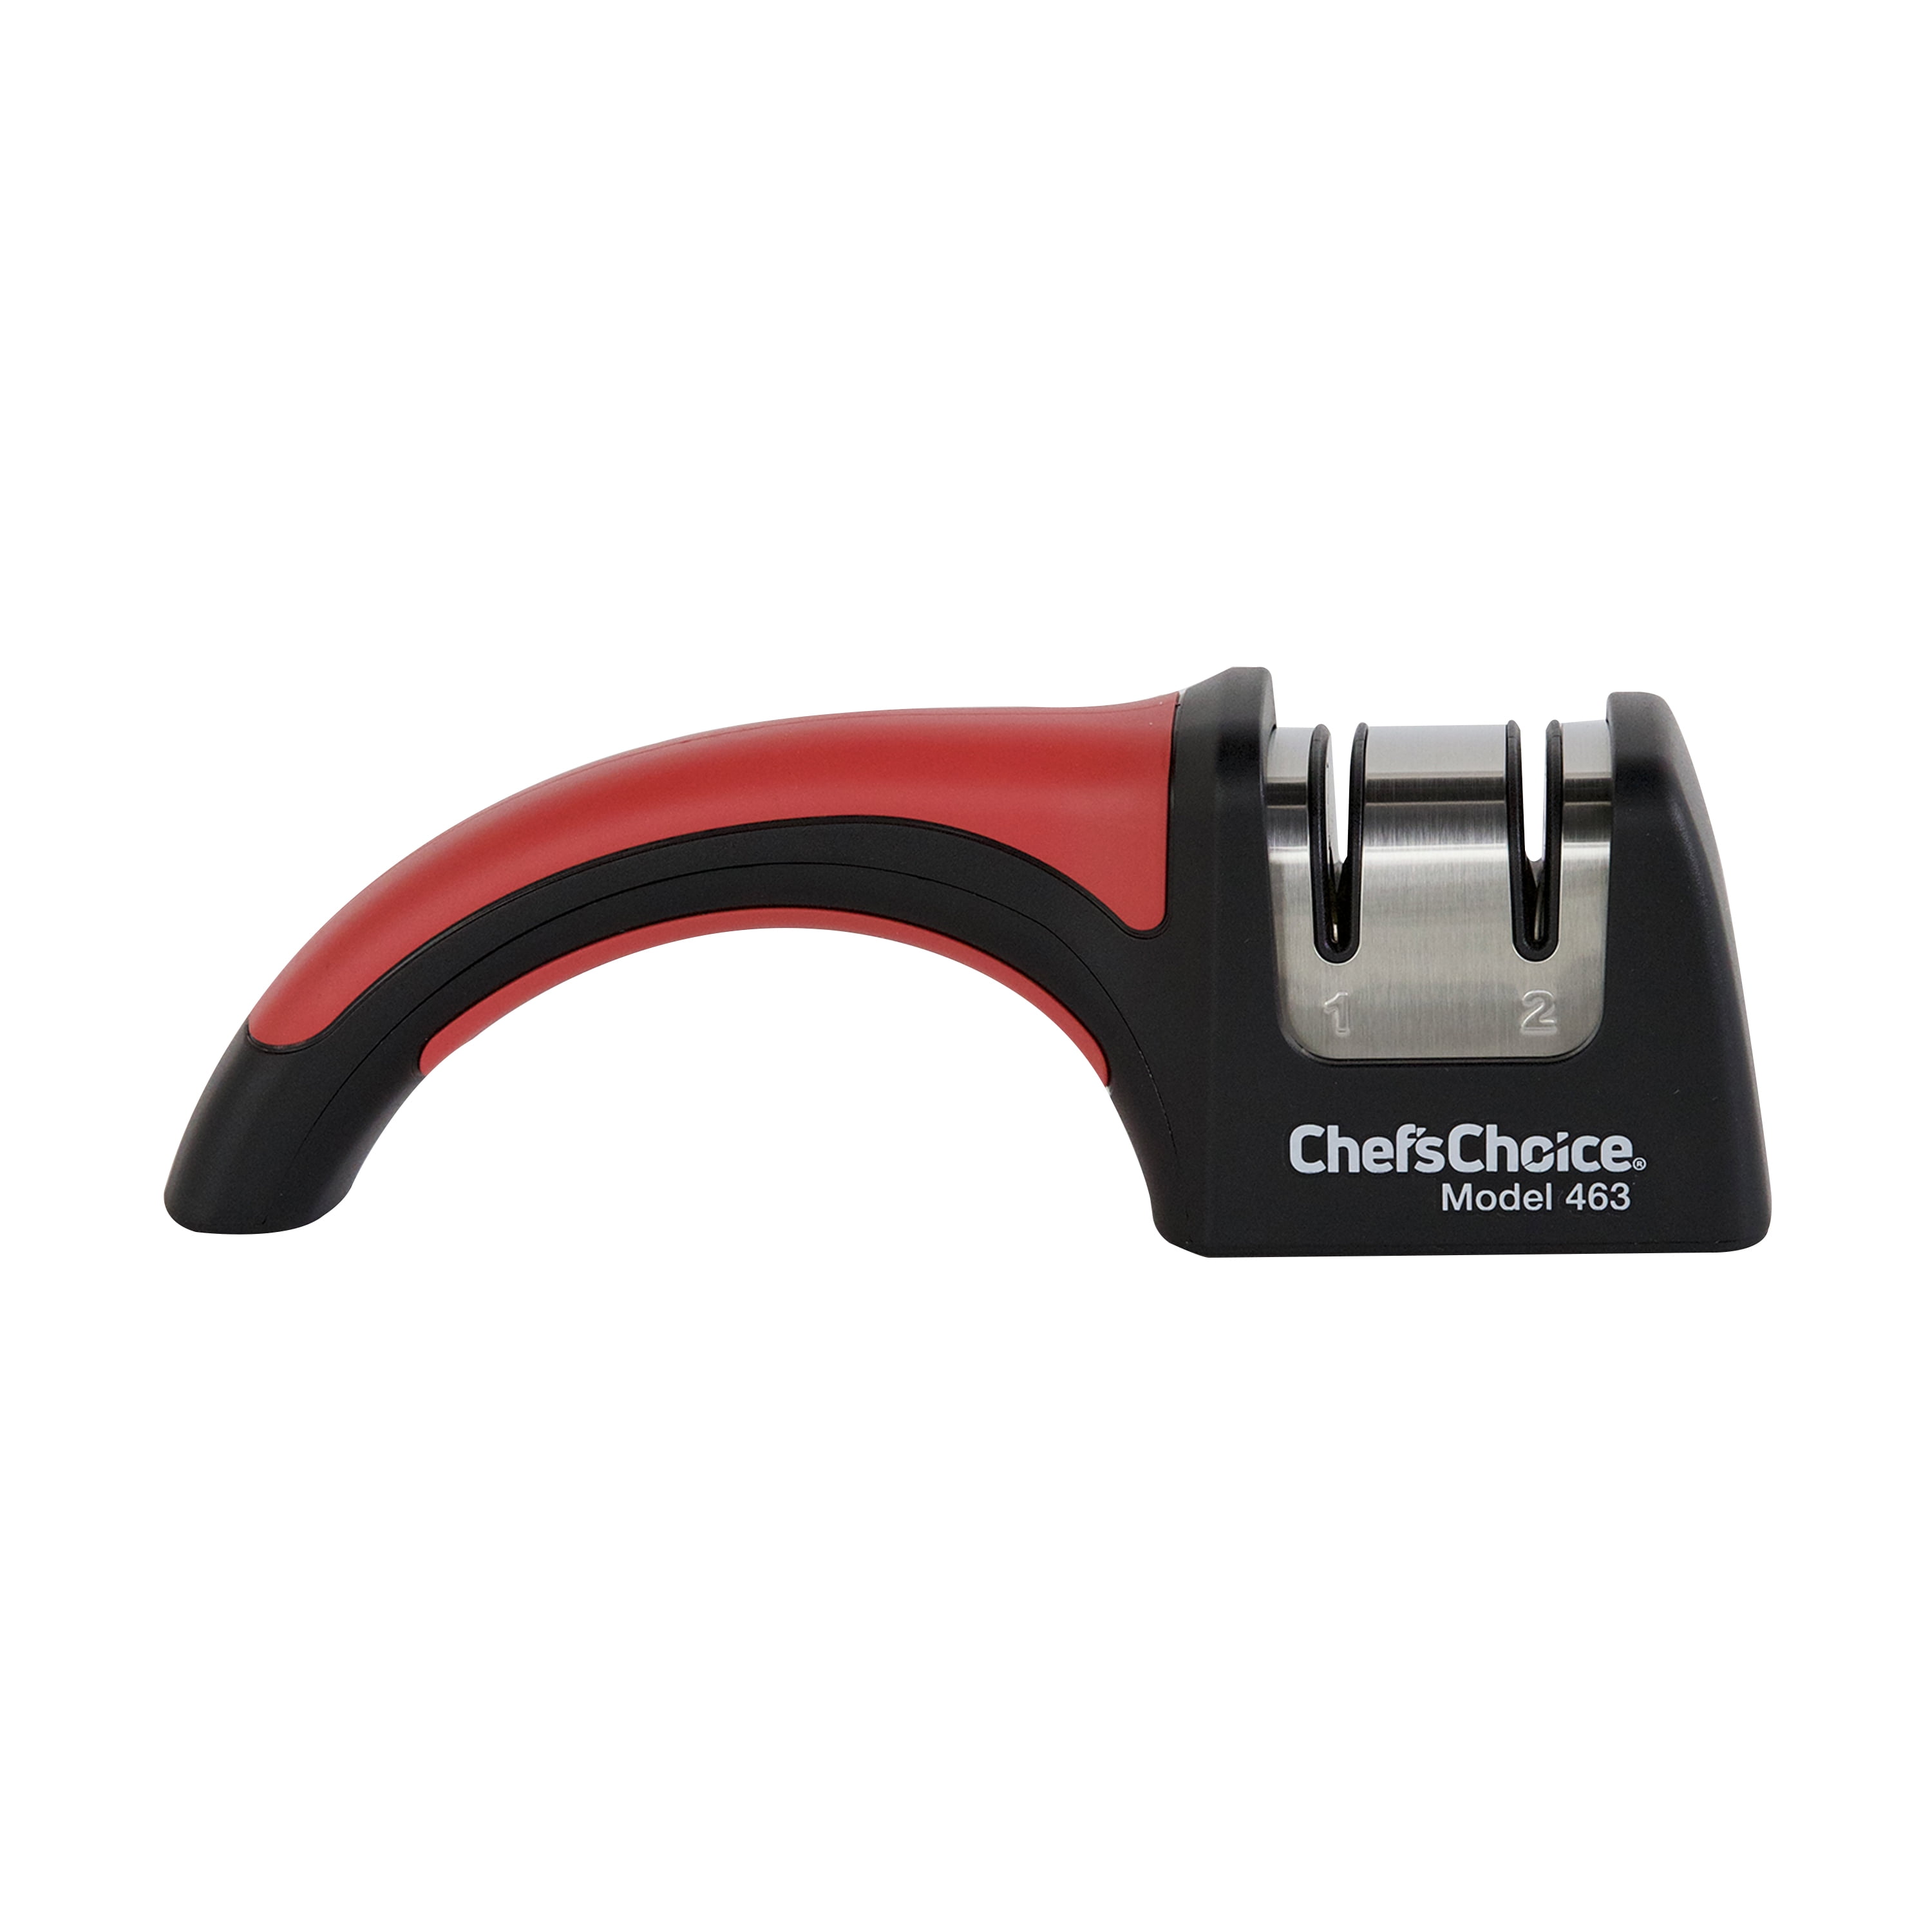 Chef'sChoice 2000 2 Stage Professional Knife Sharpener, Grey